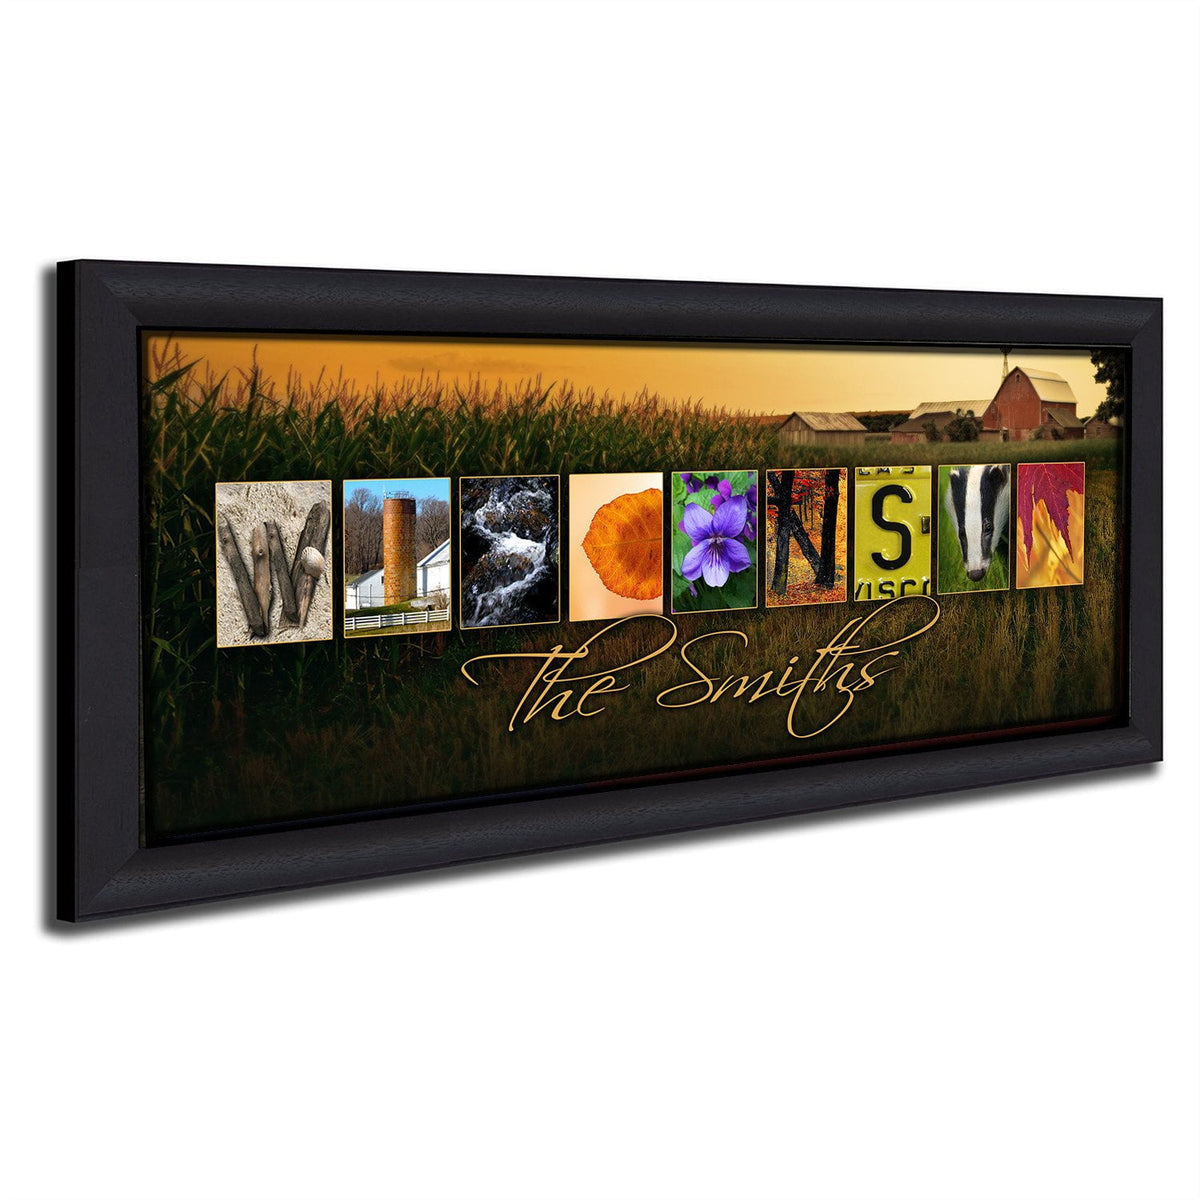 Personalized Wisconsin state pride print using pictures from around the state to spell the word Wisconsin - Personal-Prints